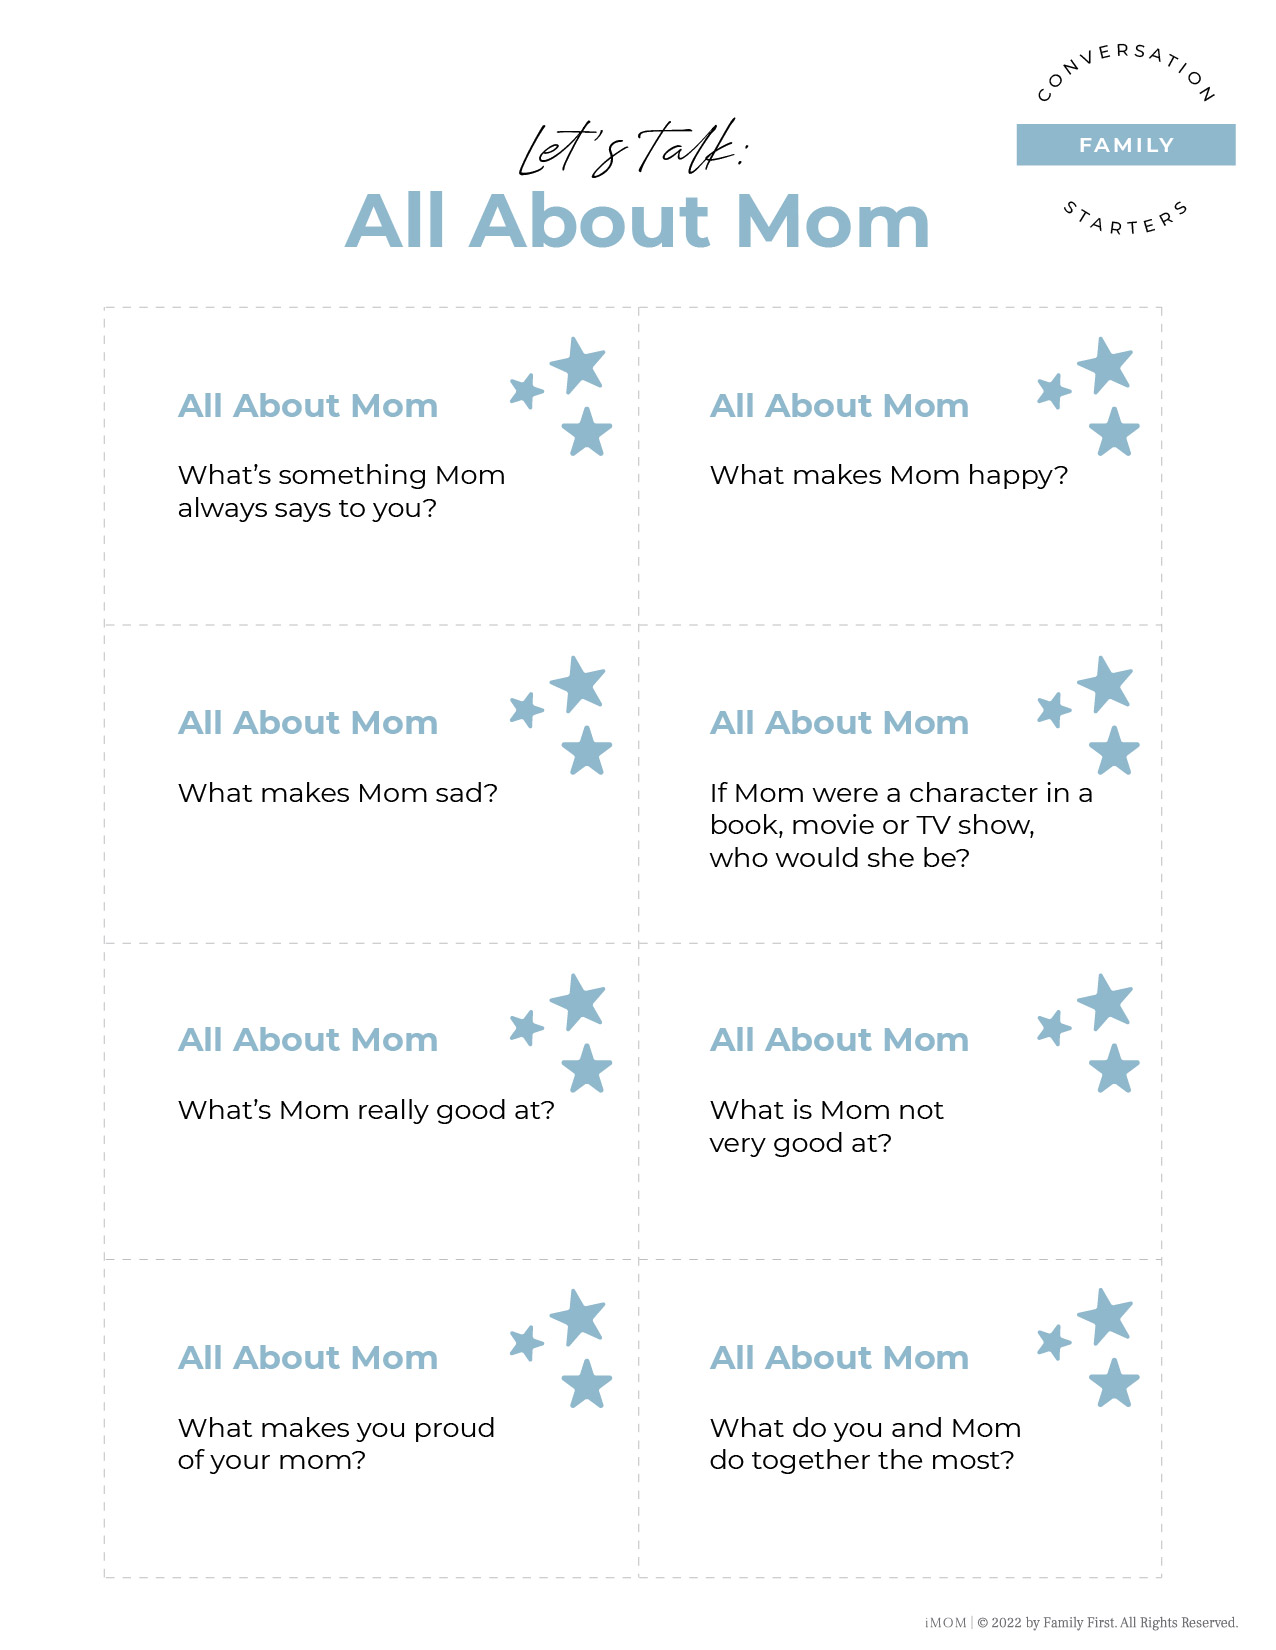 https://www.imom.com/wp-content/uploads/2015/09/questions-to-ask-mom.jpg